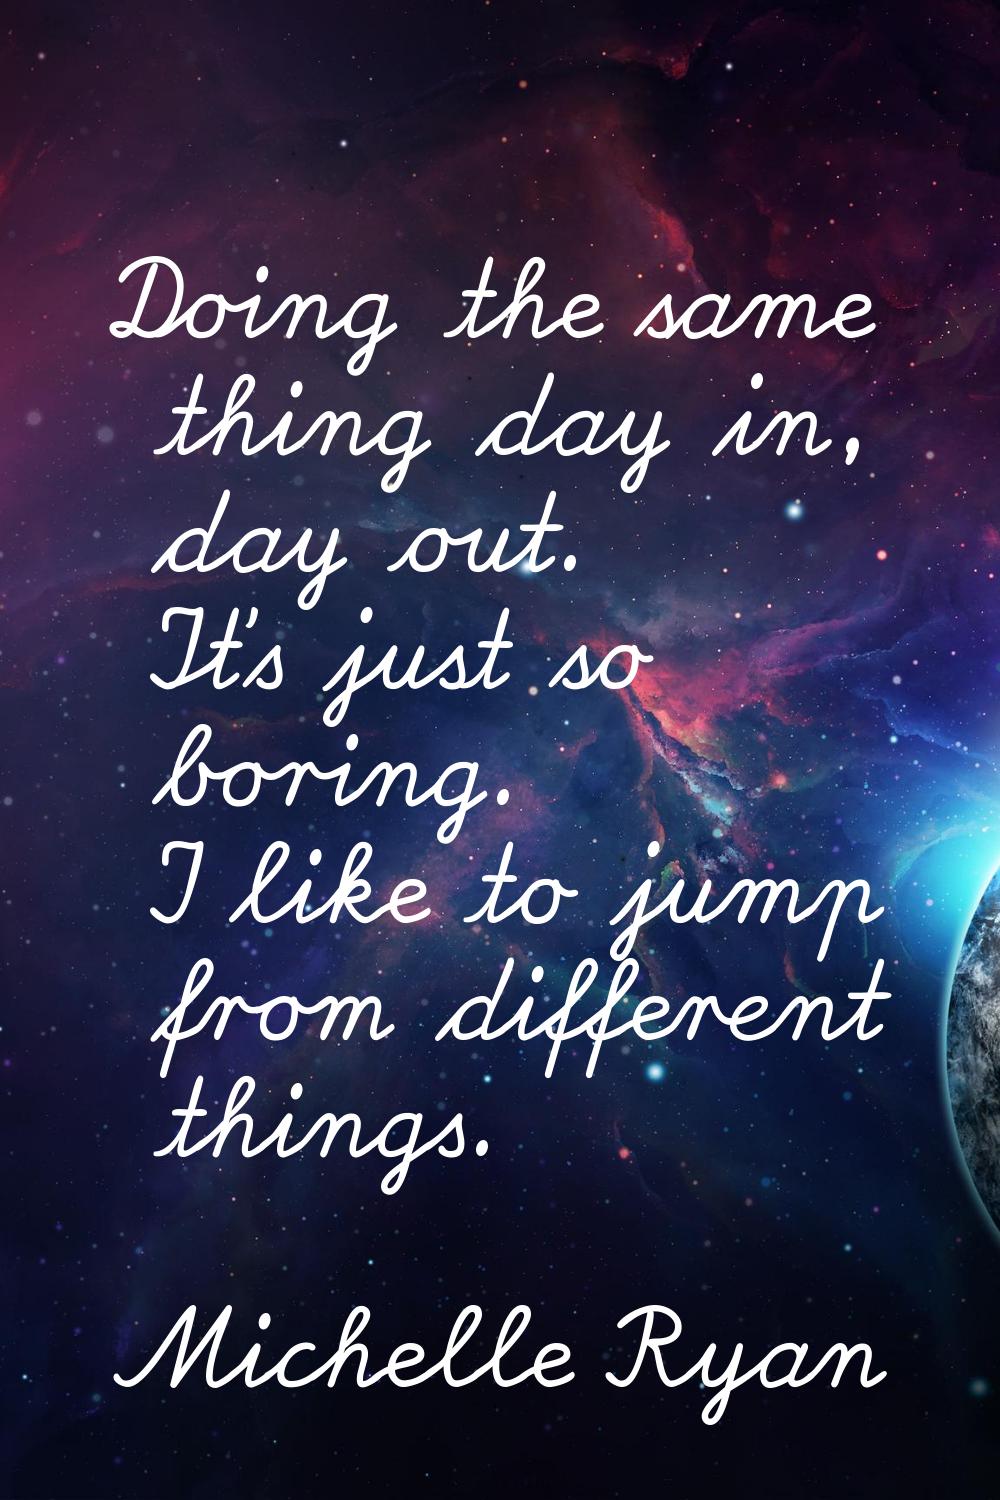 Doing the same thing day in, day out. It's just so boring. I like to jump from different things.